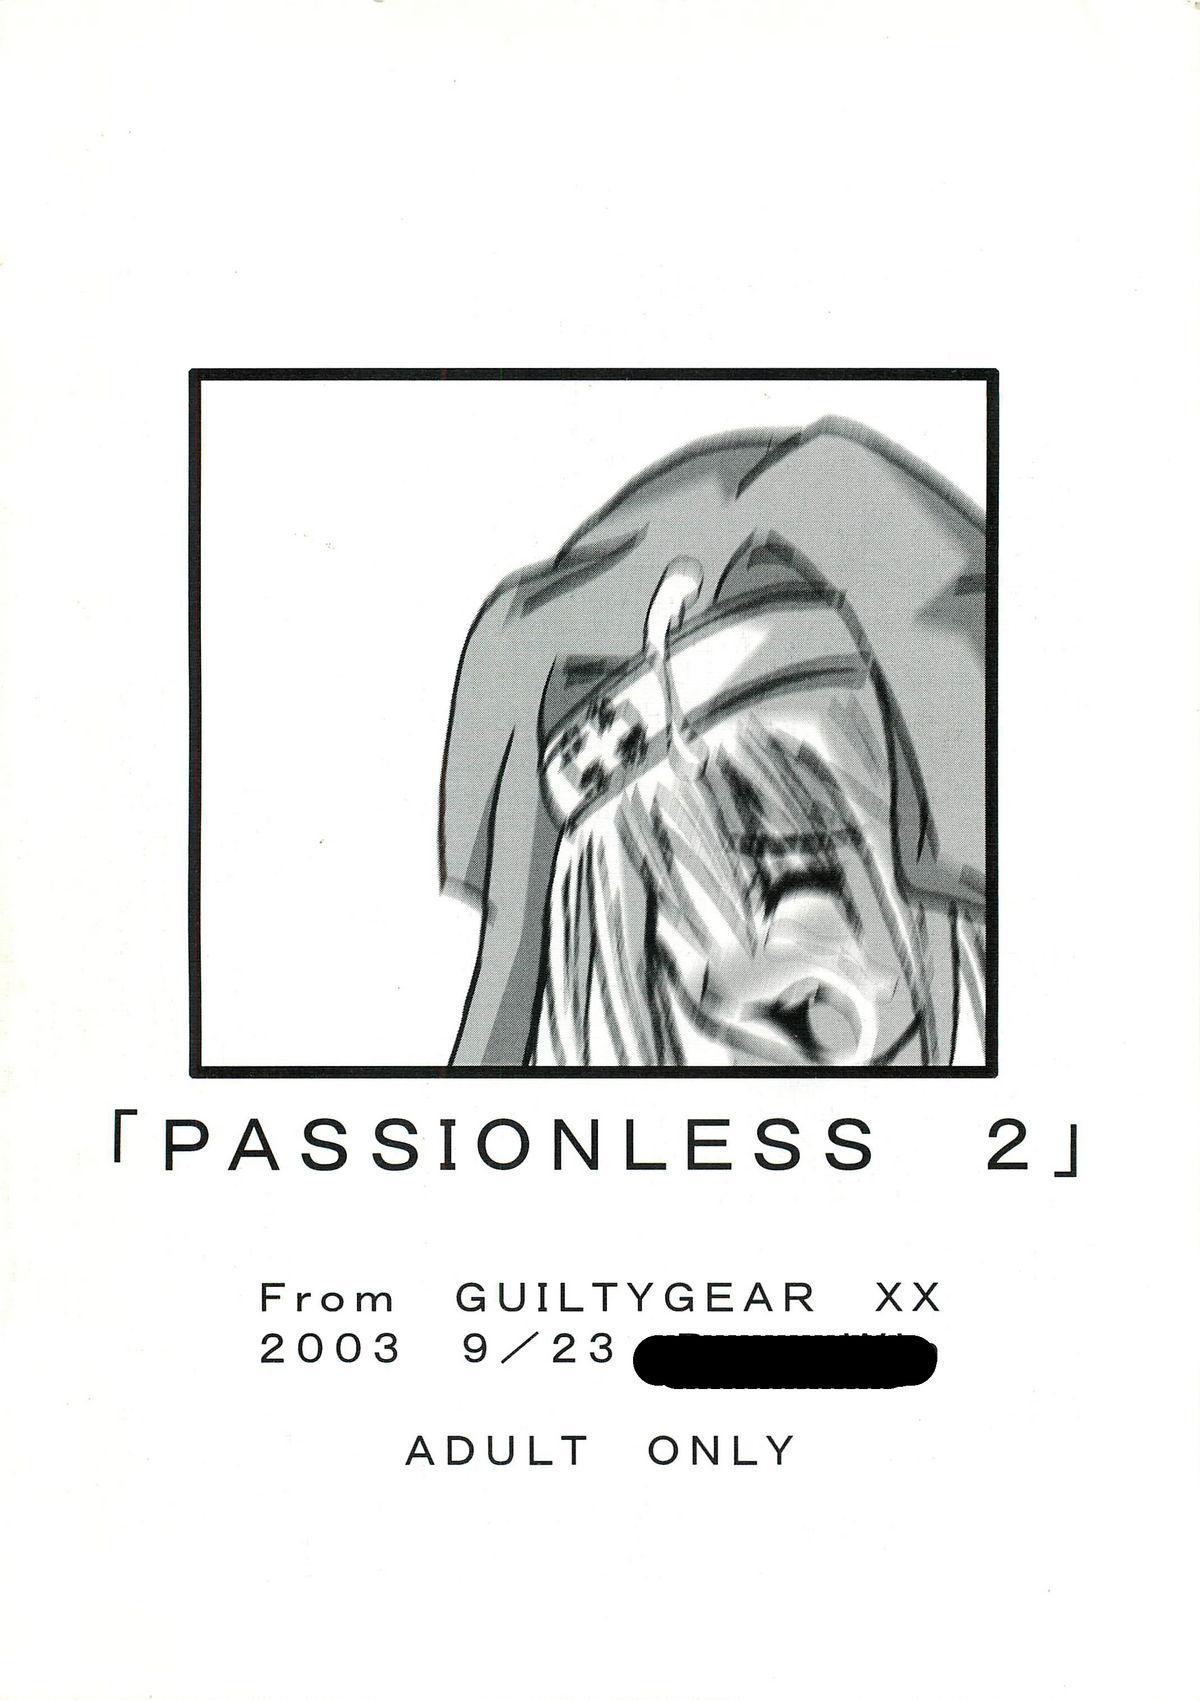 Naked Sex Passionless 2 - Guilty gear Amateur - Page 25